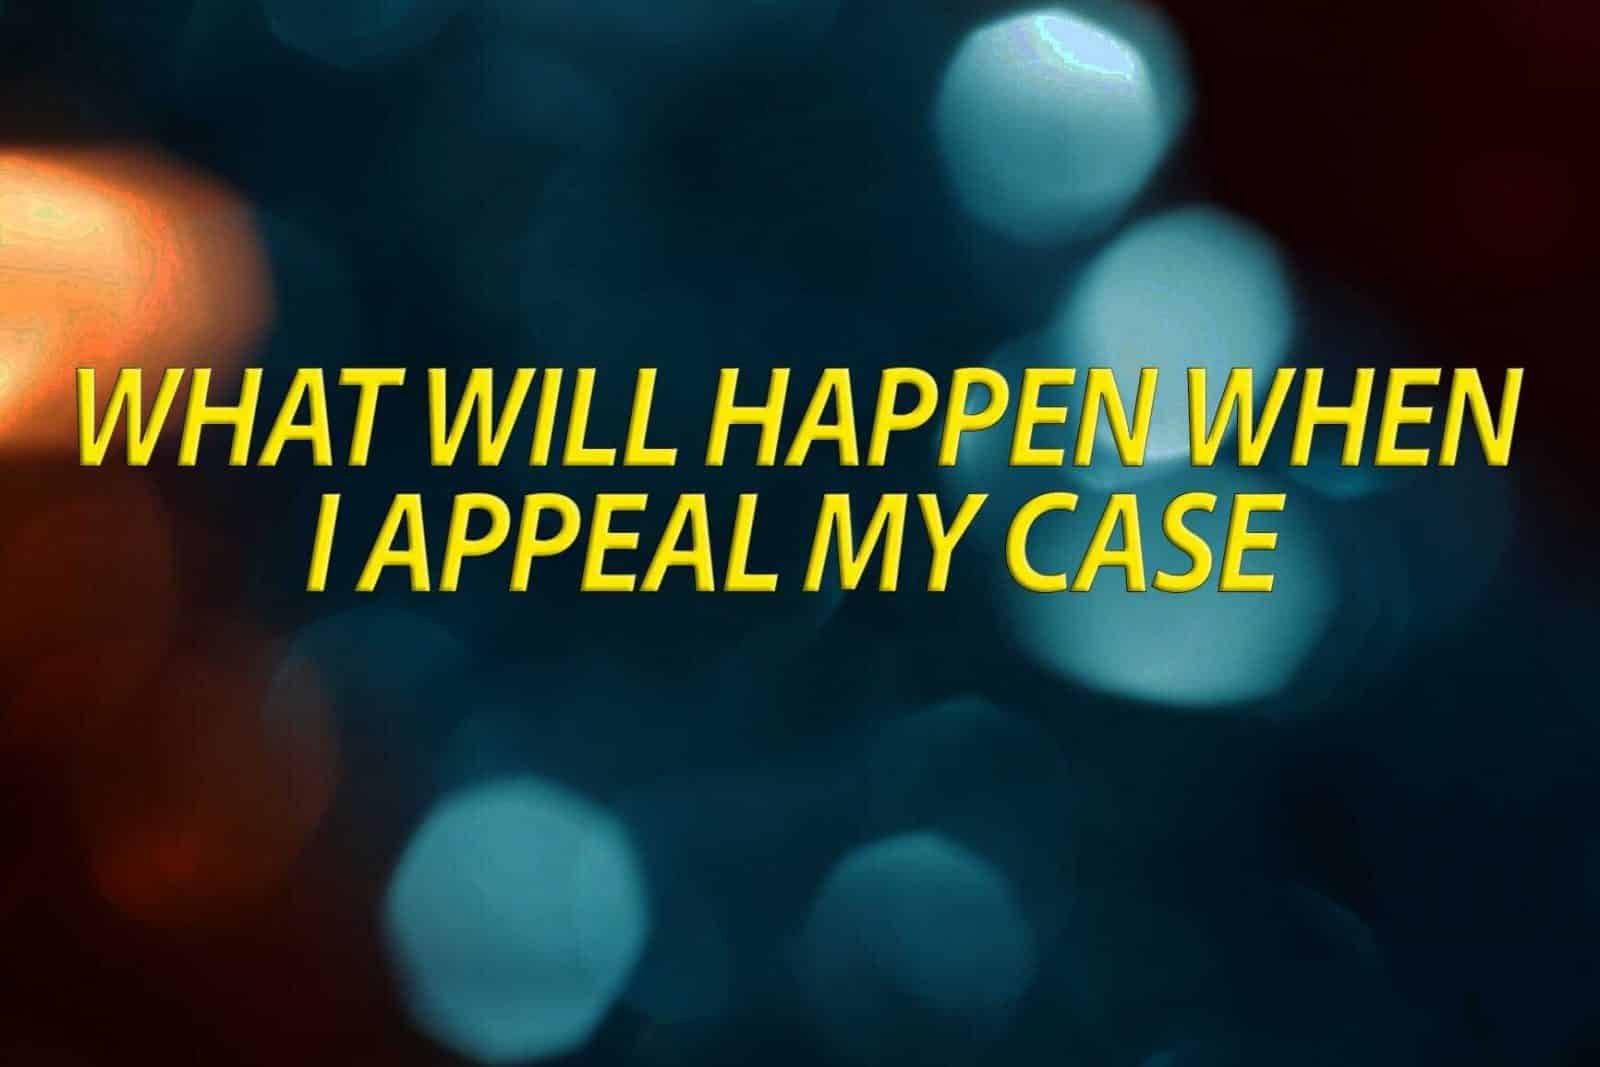 What will happen when I appeal my case